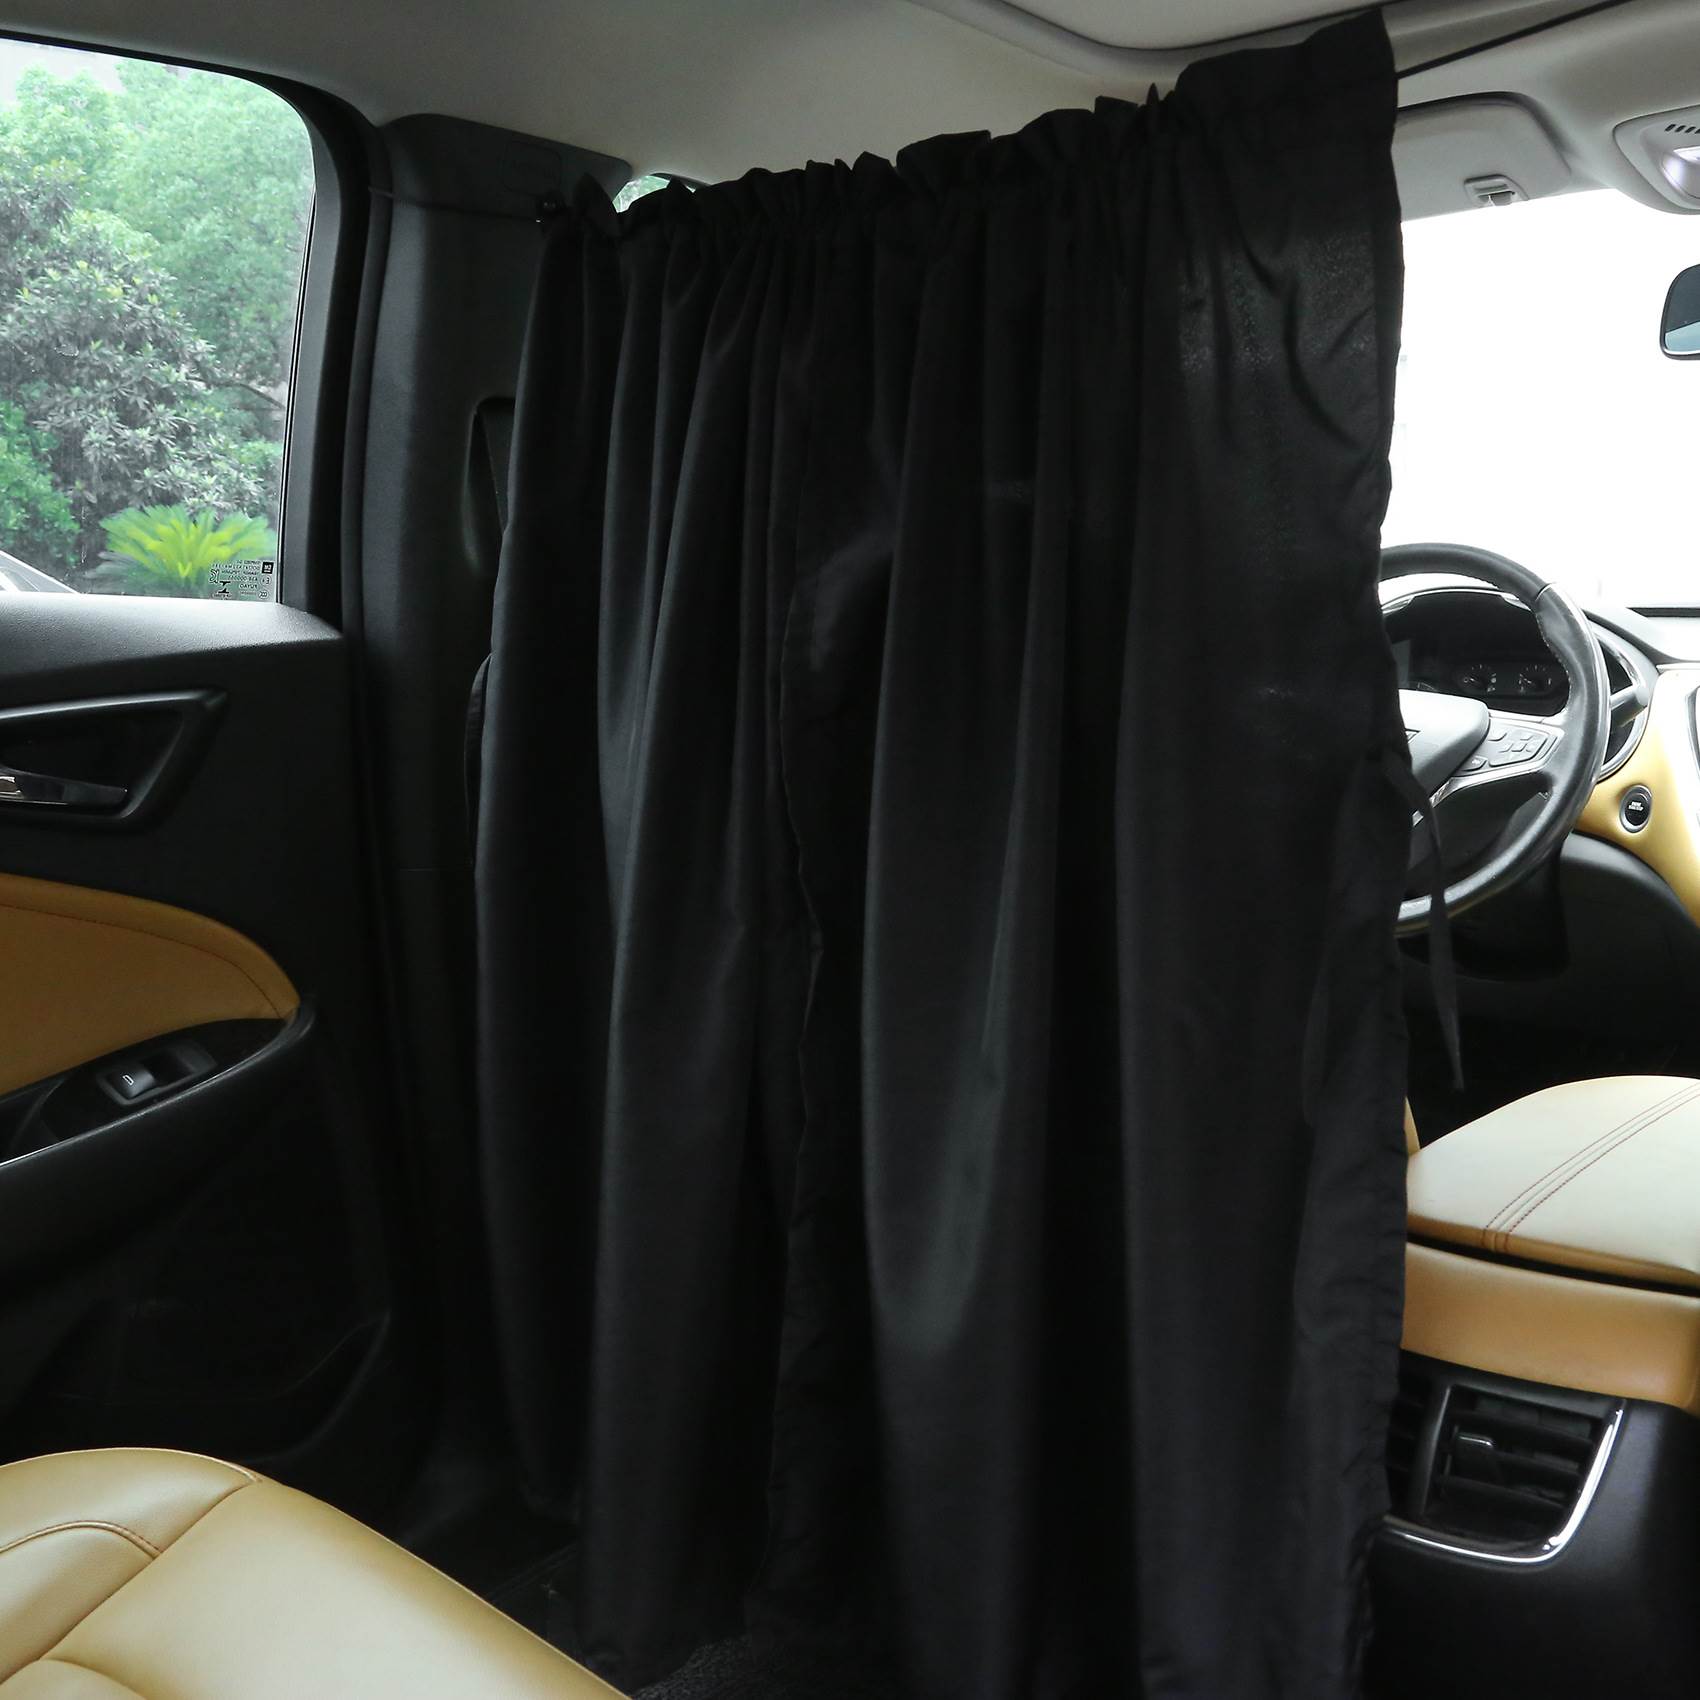 Car Vans Middle Car Partition Curtain Front Rear Rear Air Conditioning Van Sleeper Blinds Privacy Curtain Shelter Sleeping-Taobao